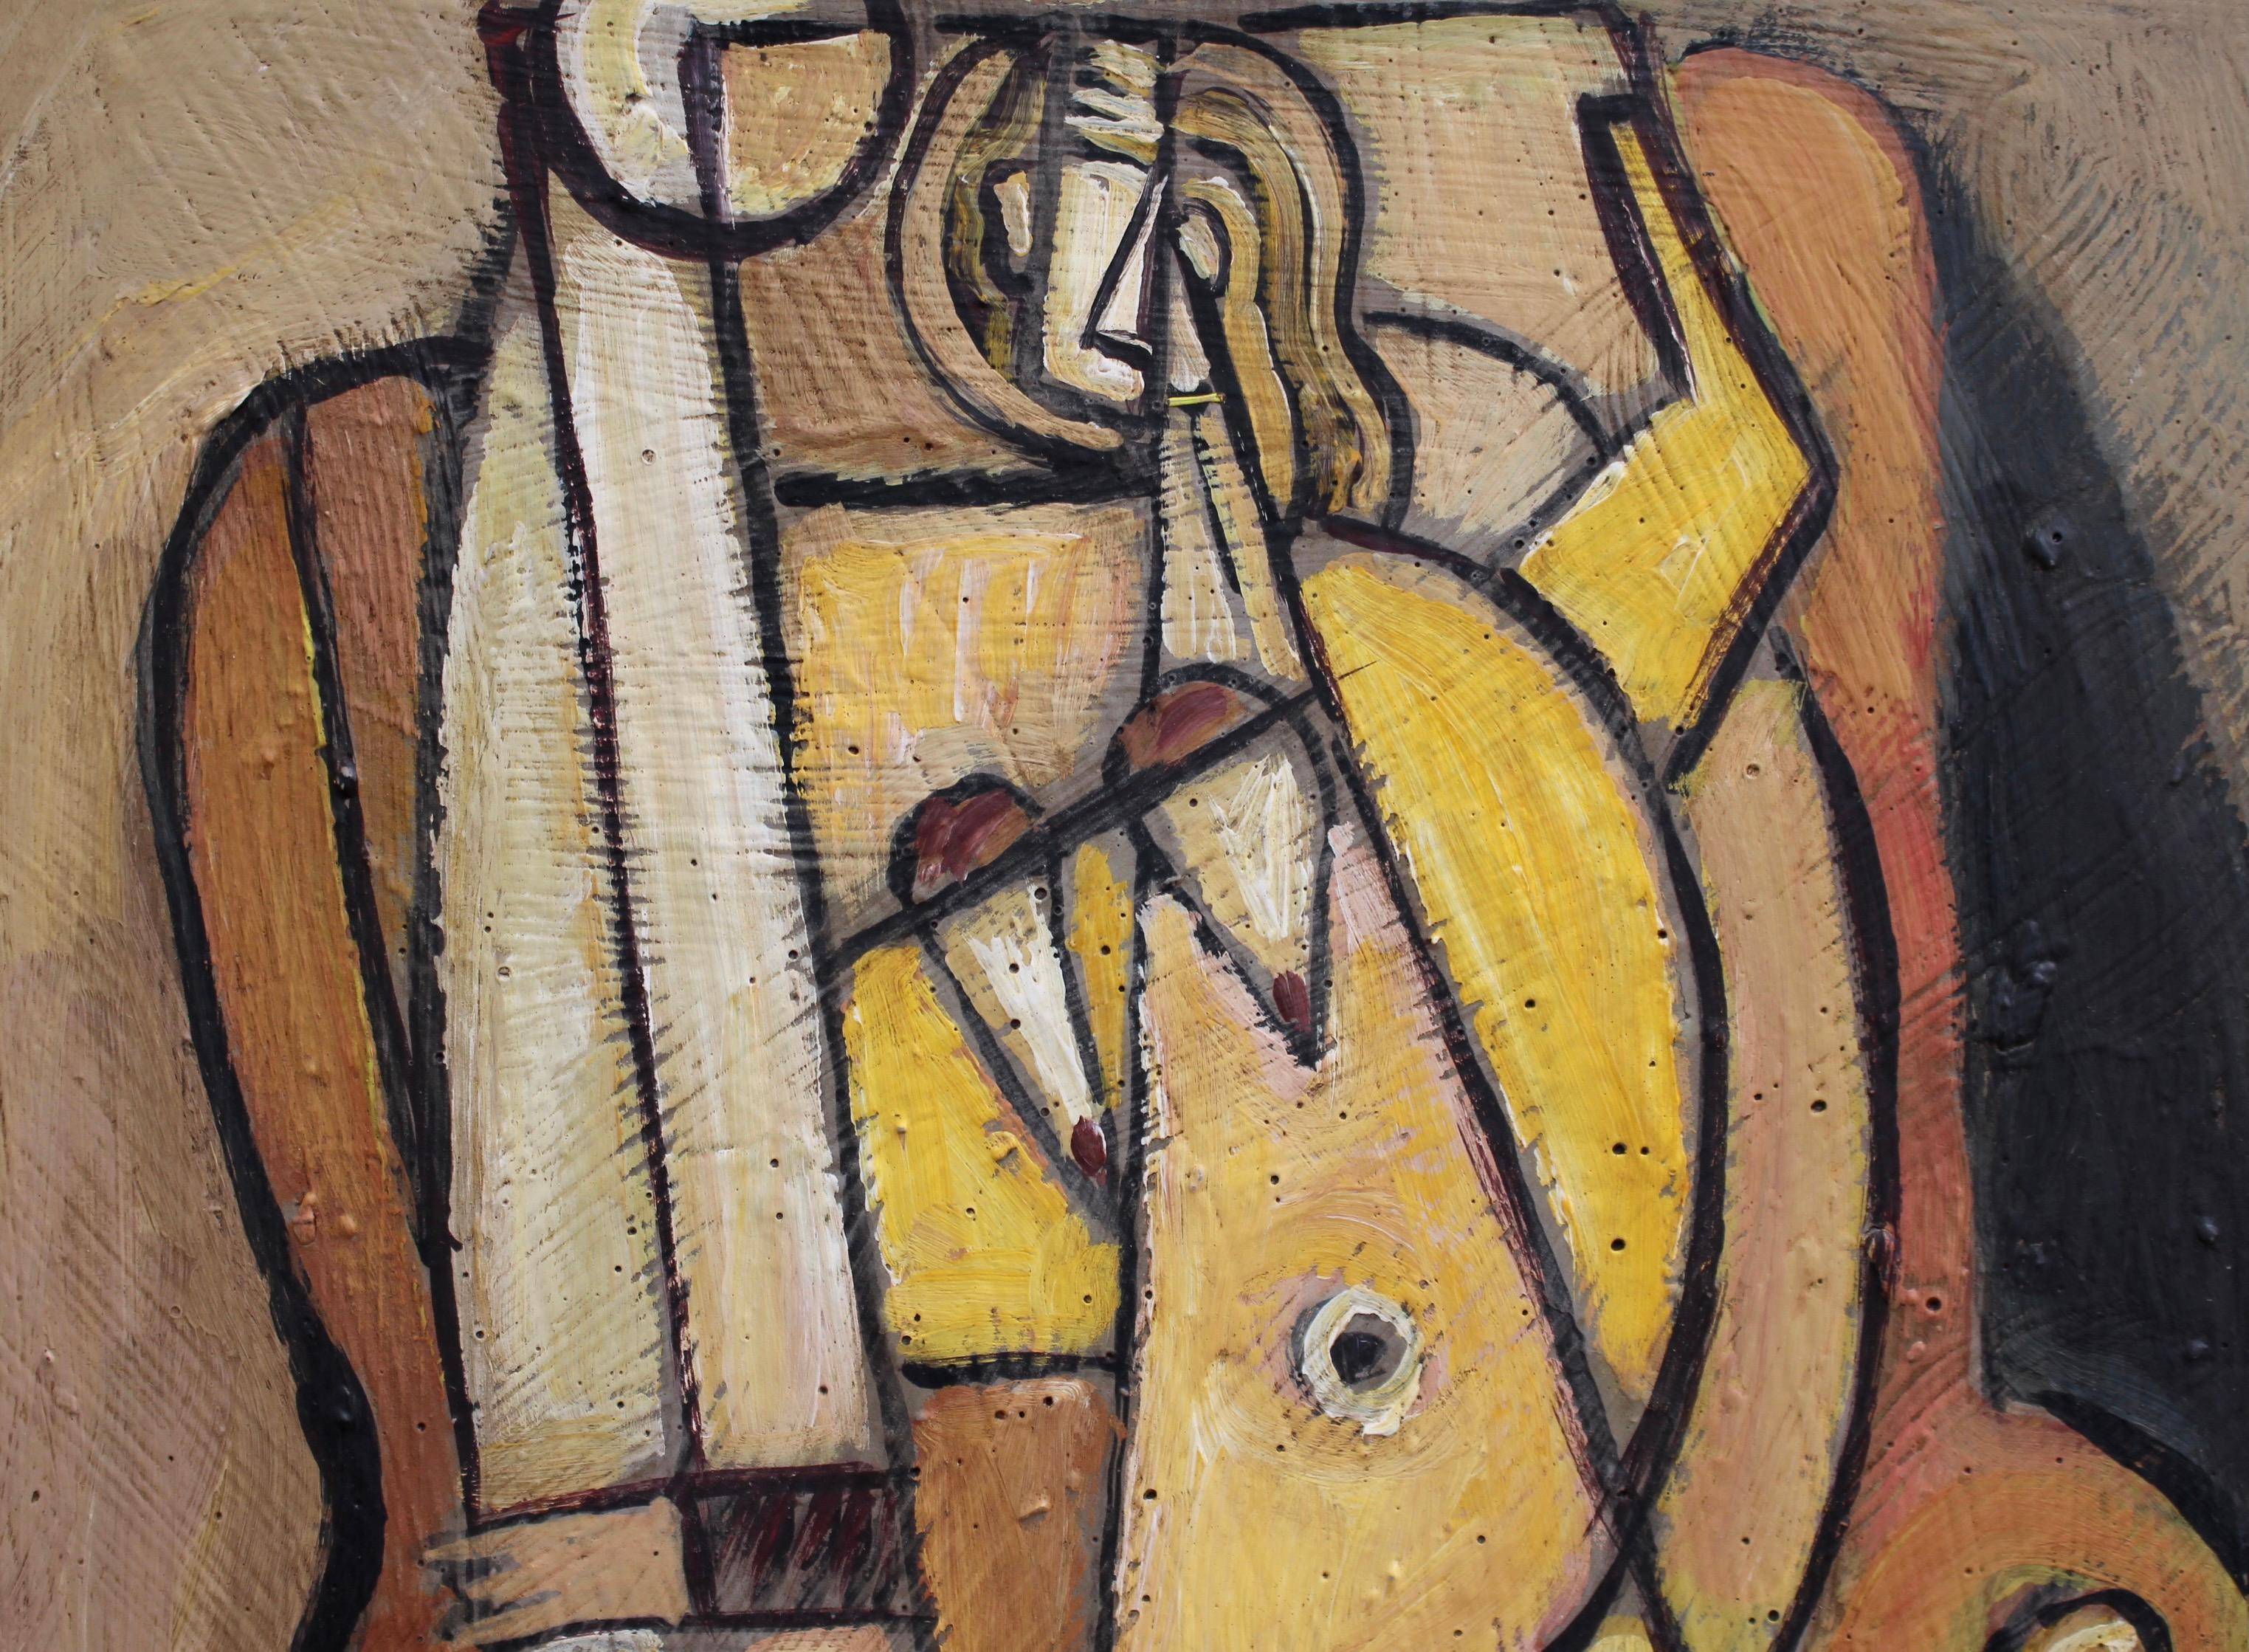 'Nude Seated on Armchair' oil on canvas, Berlin School, initialed 'MR', (circa 1960s). This artwork is derivative of a famous work by Pablo Picasso created in 1913. It marked a breakthrough in the style known as Synthetic Cubism, wherein